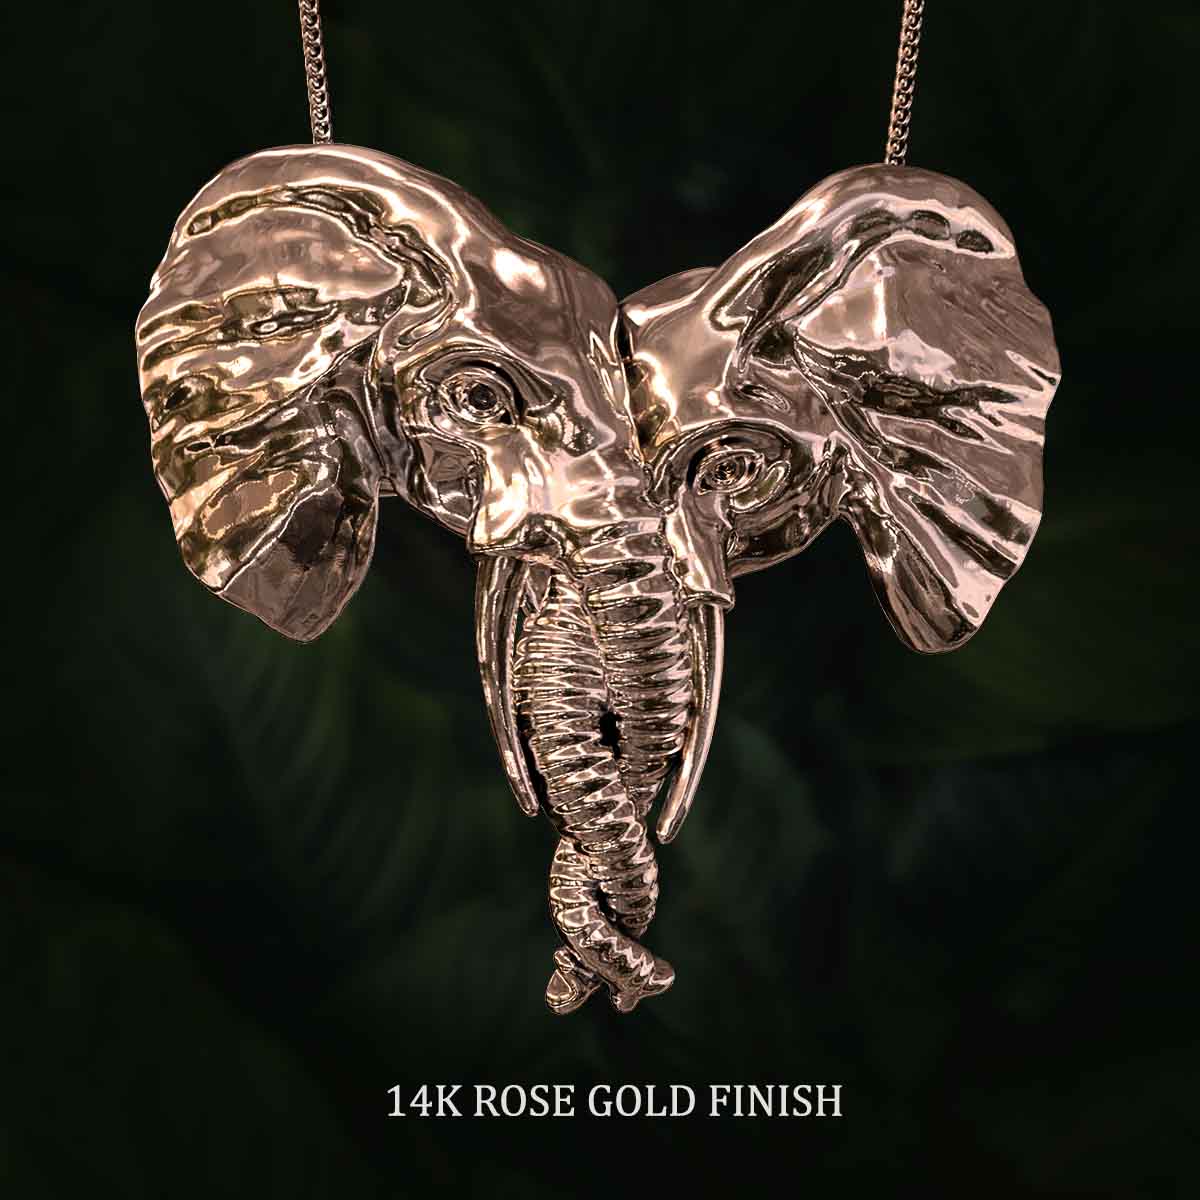 14k-Rose-Gold-Finish-Elephant-Heads-with-Trunks-Entwined-Pendant-Jewelry-For-Necklace